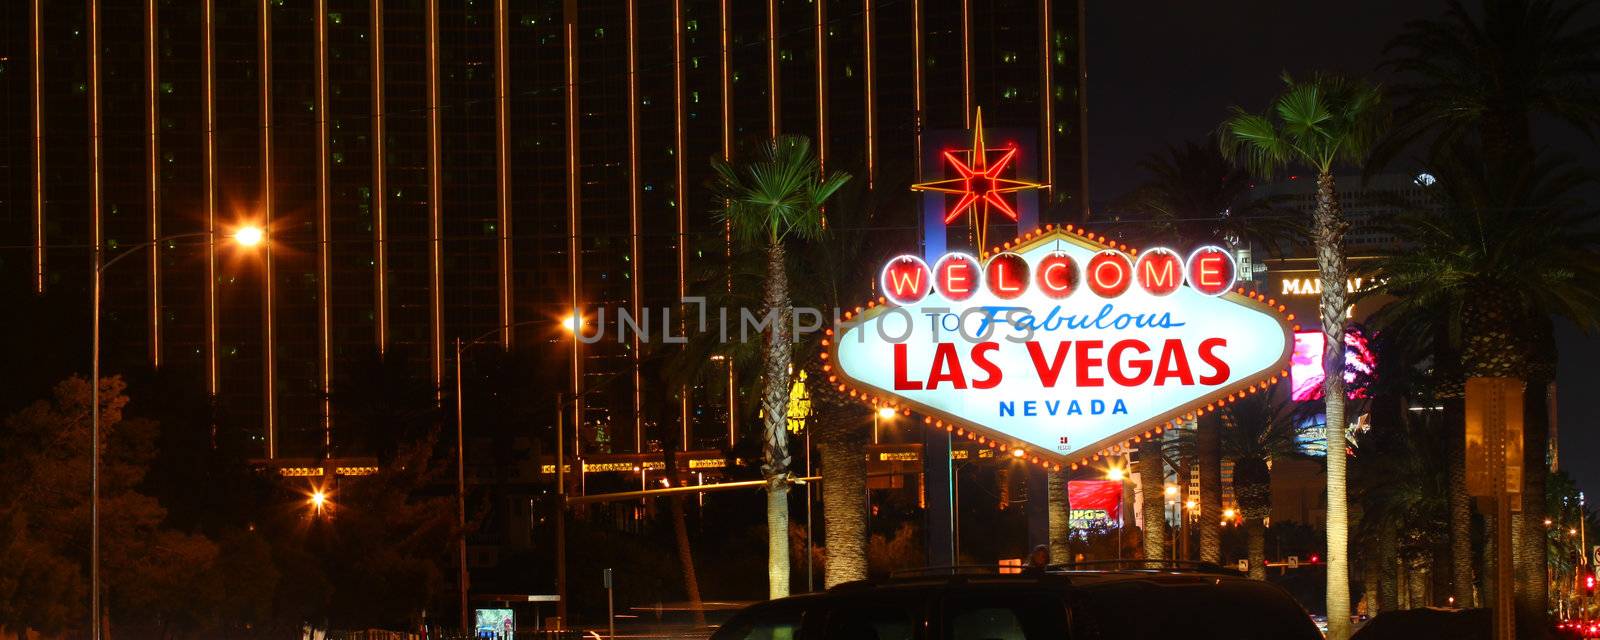 Welcome to Las Vegas Strip by Wirepec